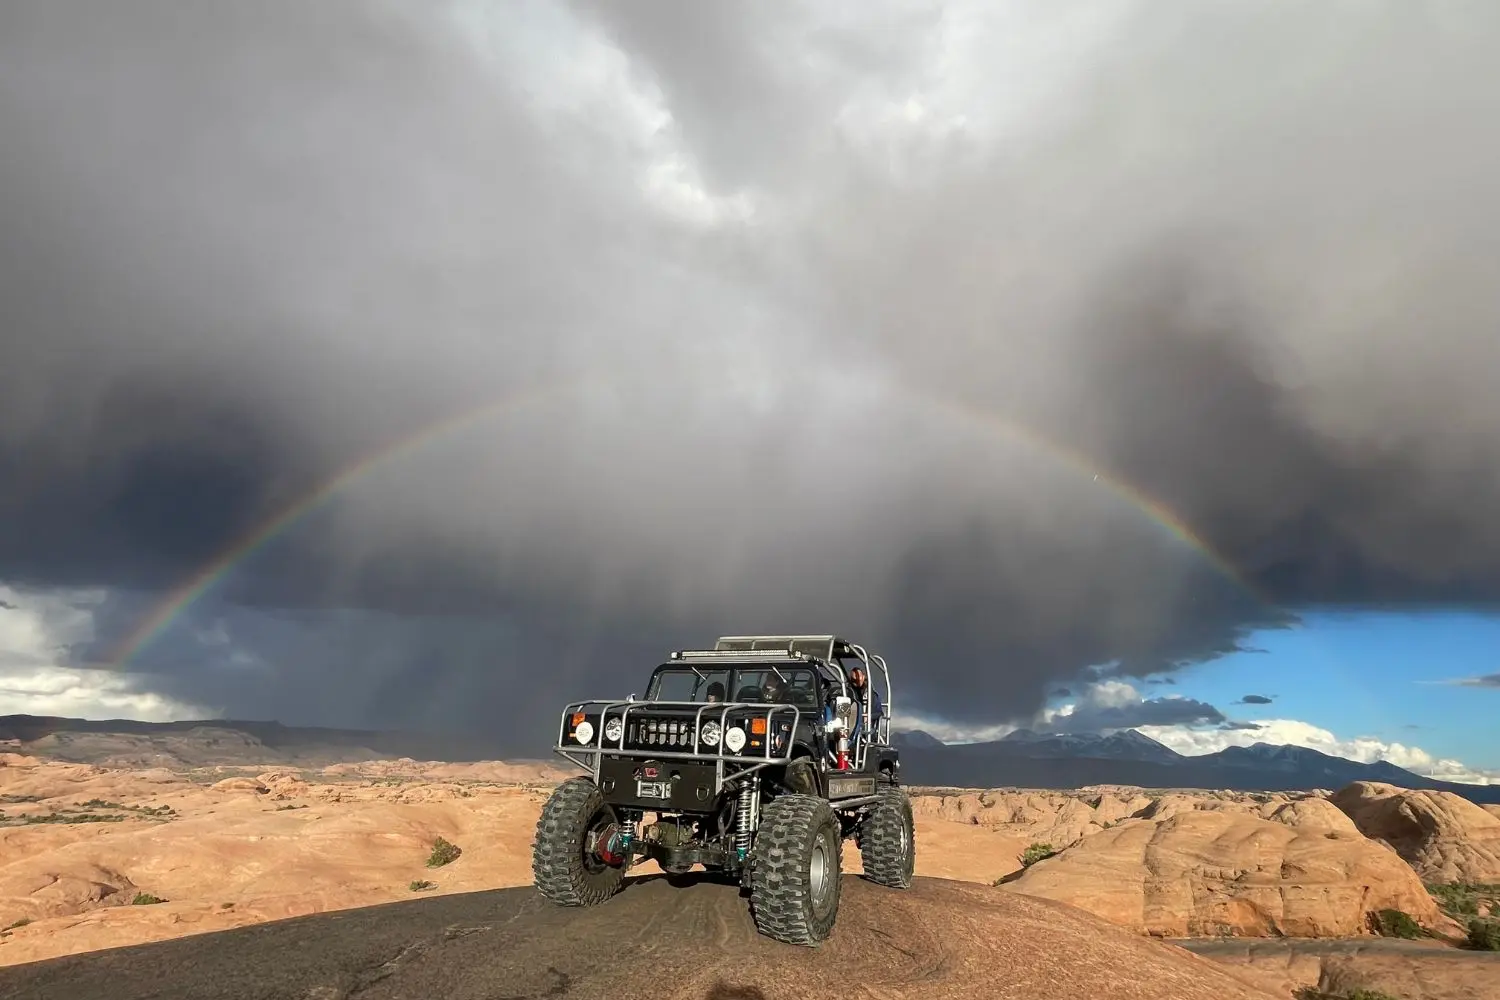 Moab Grand Tours Scenic Rainbow with the Beast & Hell's Revenge in Moab, Utah